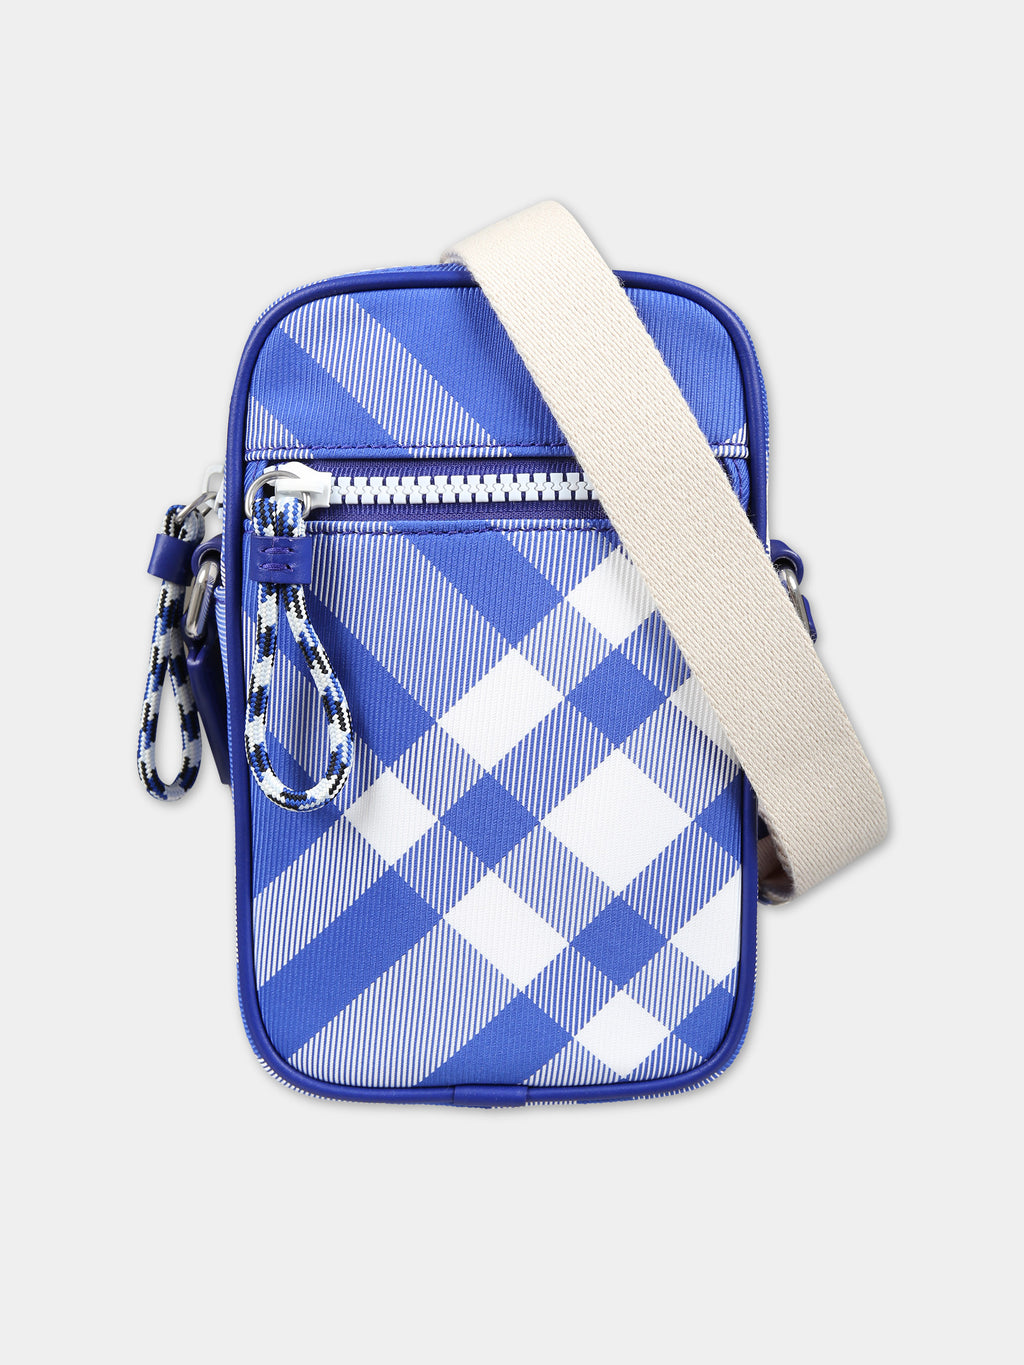 Blue bag for kids with check